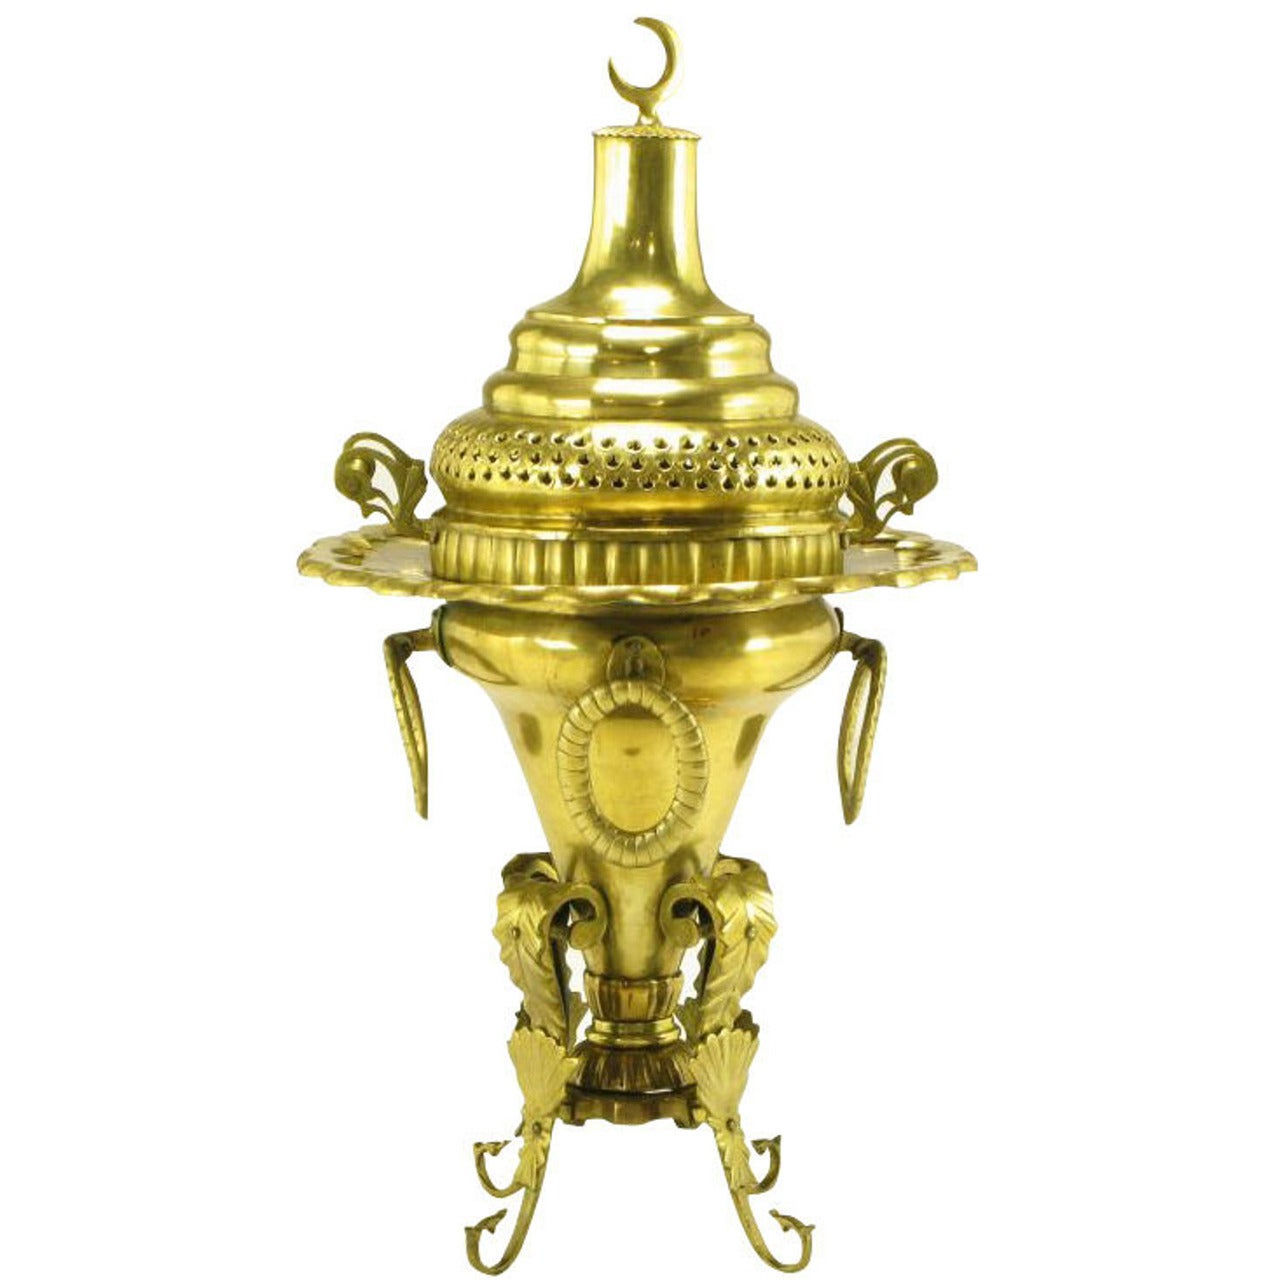 Moroccan Pierced and Ornamented Brass Coal Burning Stove For Sale